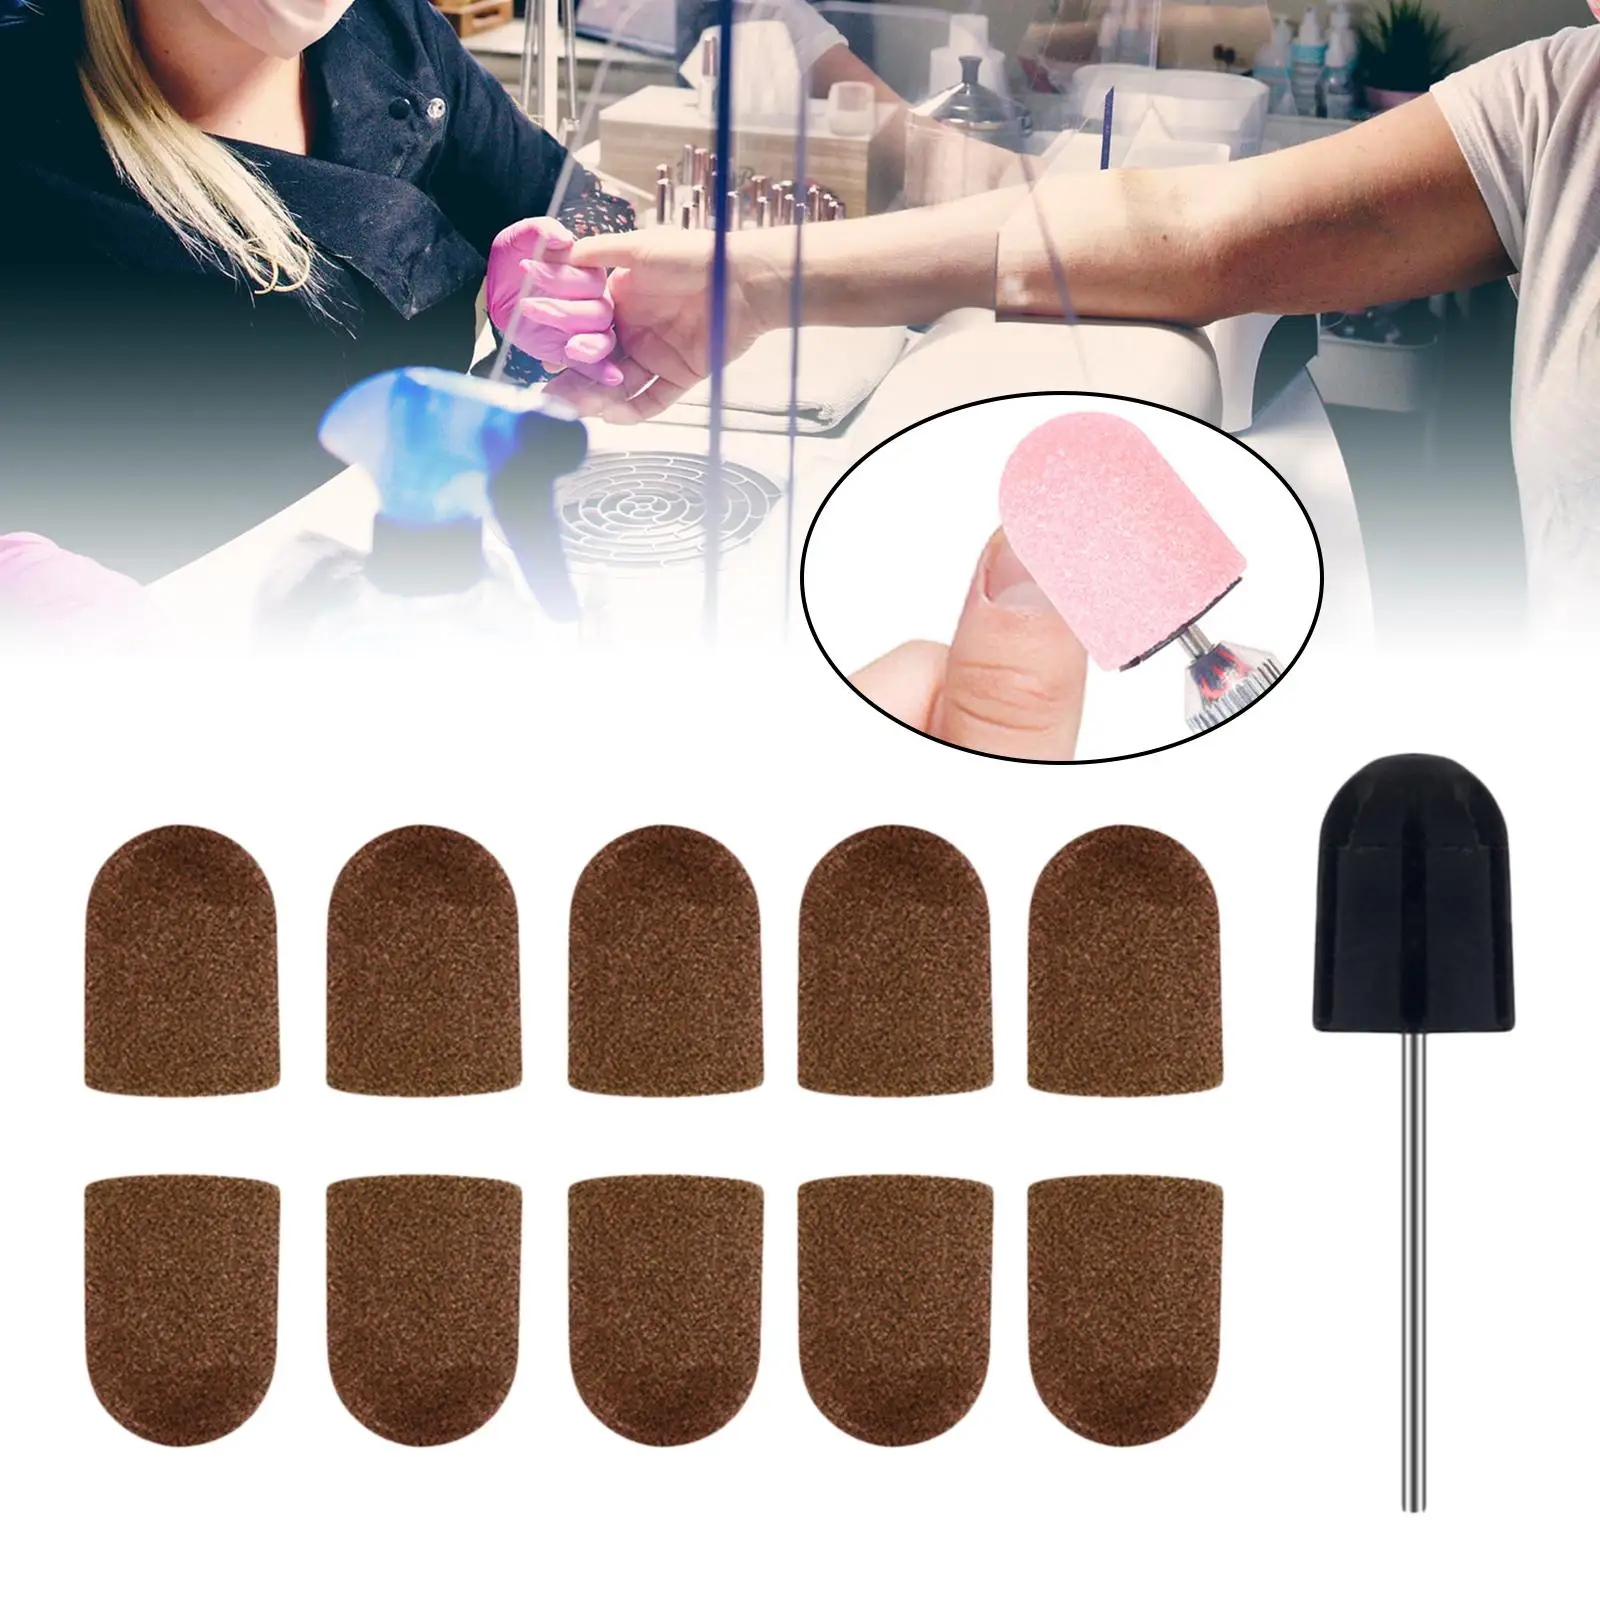 Nail Sanding Caps Bands Drill Accessories UV Gel Gel Polish Cuticle Pusher Sanding Grinding Head for Salon Home Use Nail Art